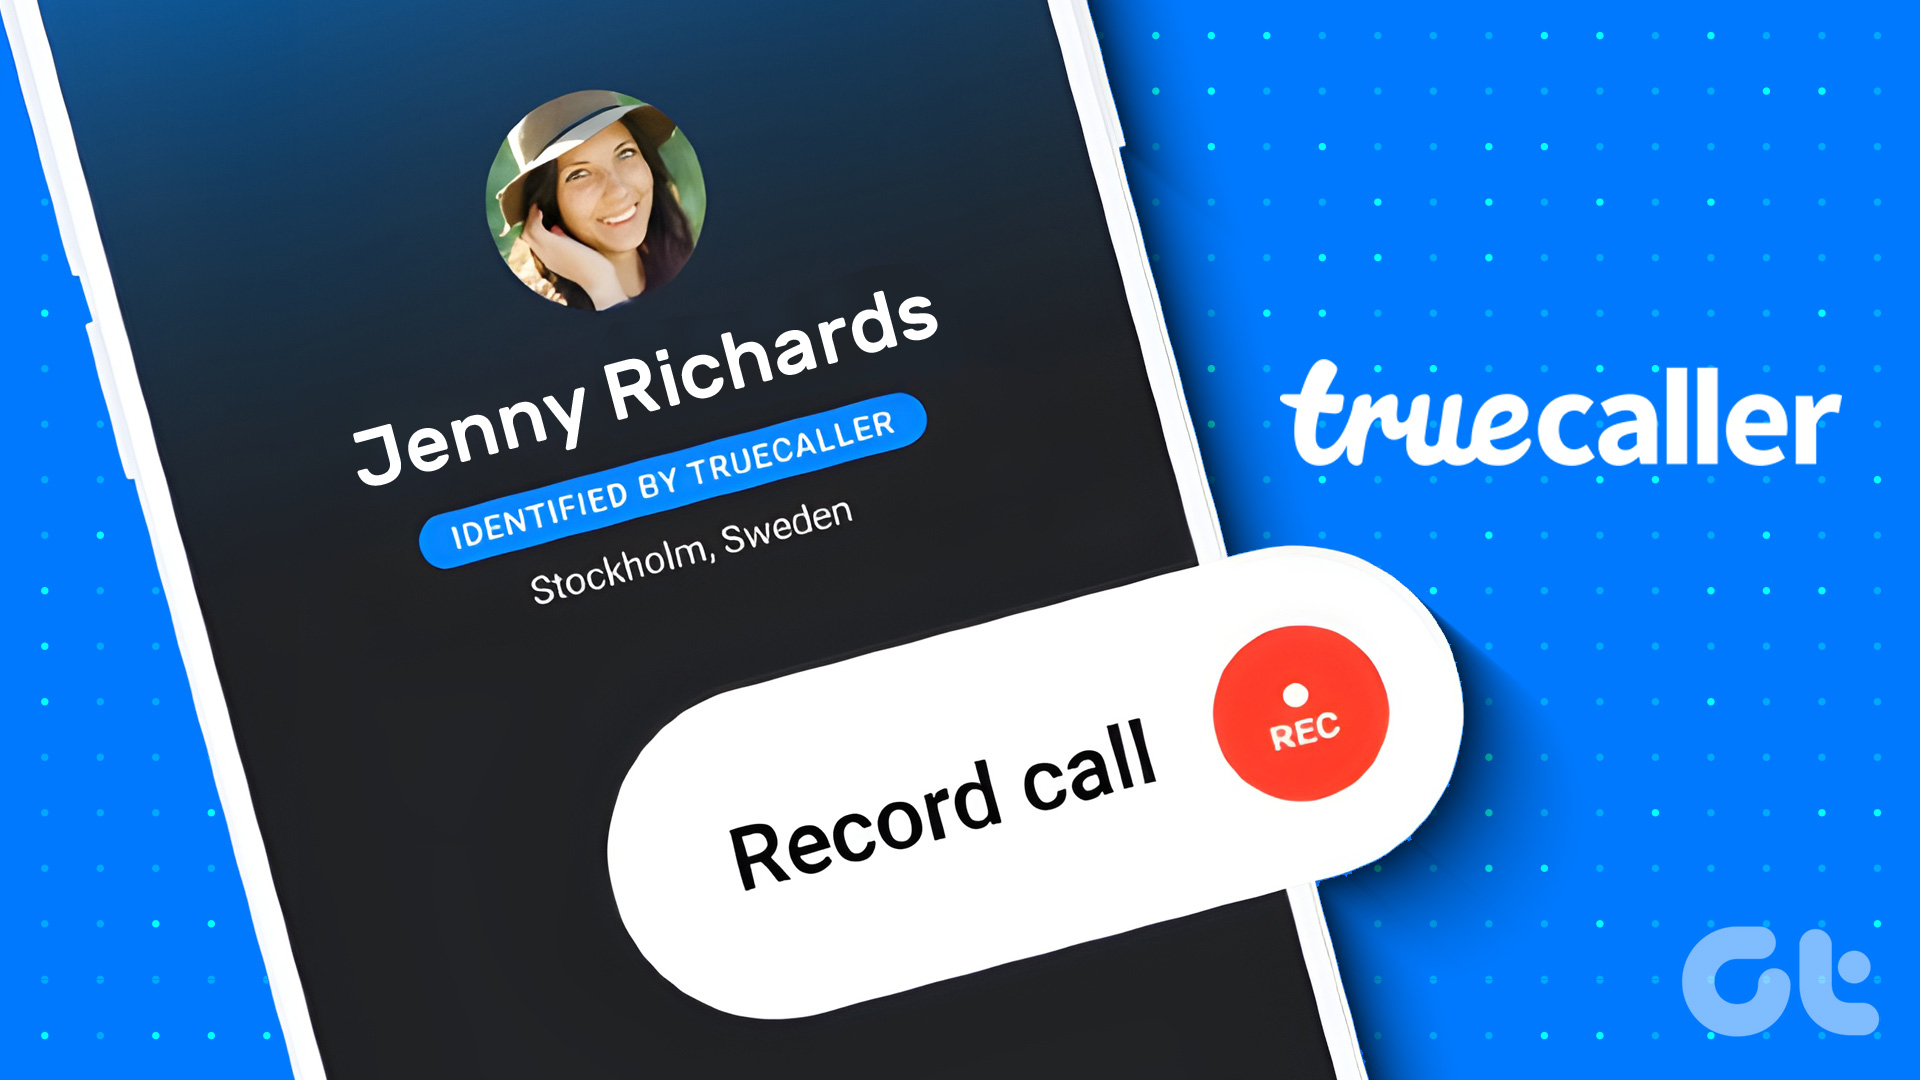 how to use Truecaller to record calls